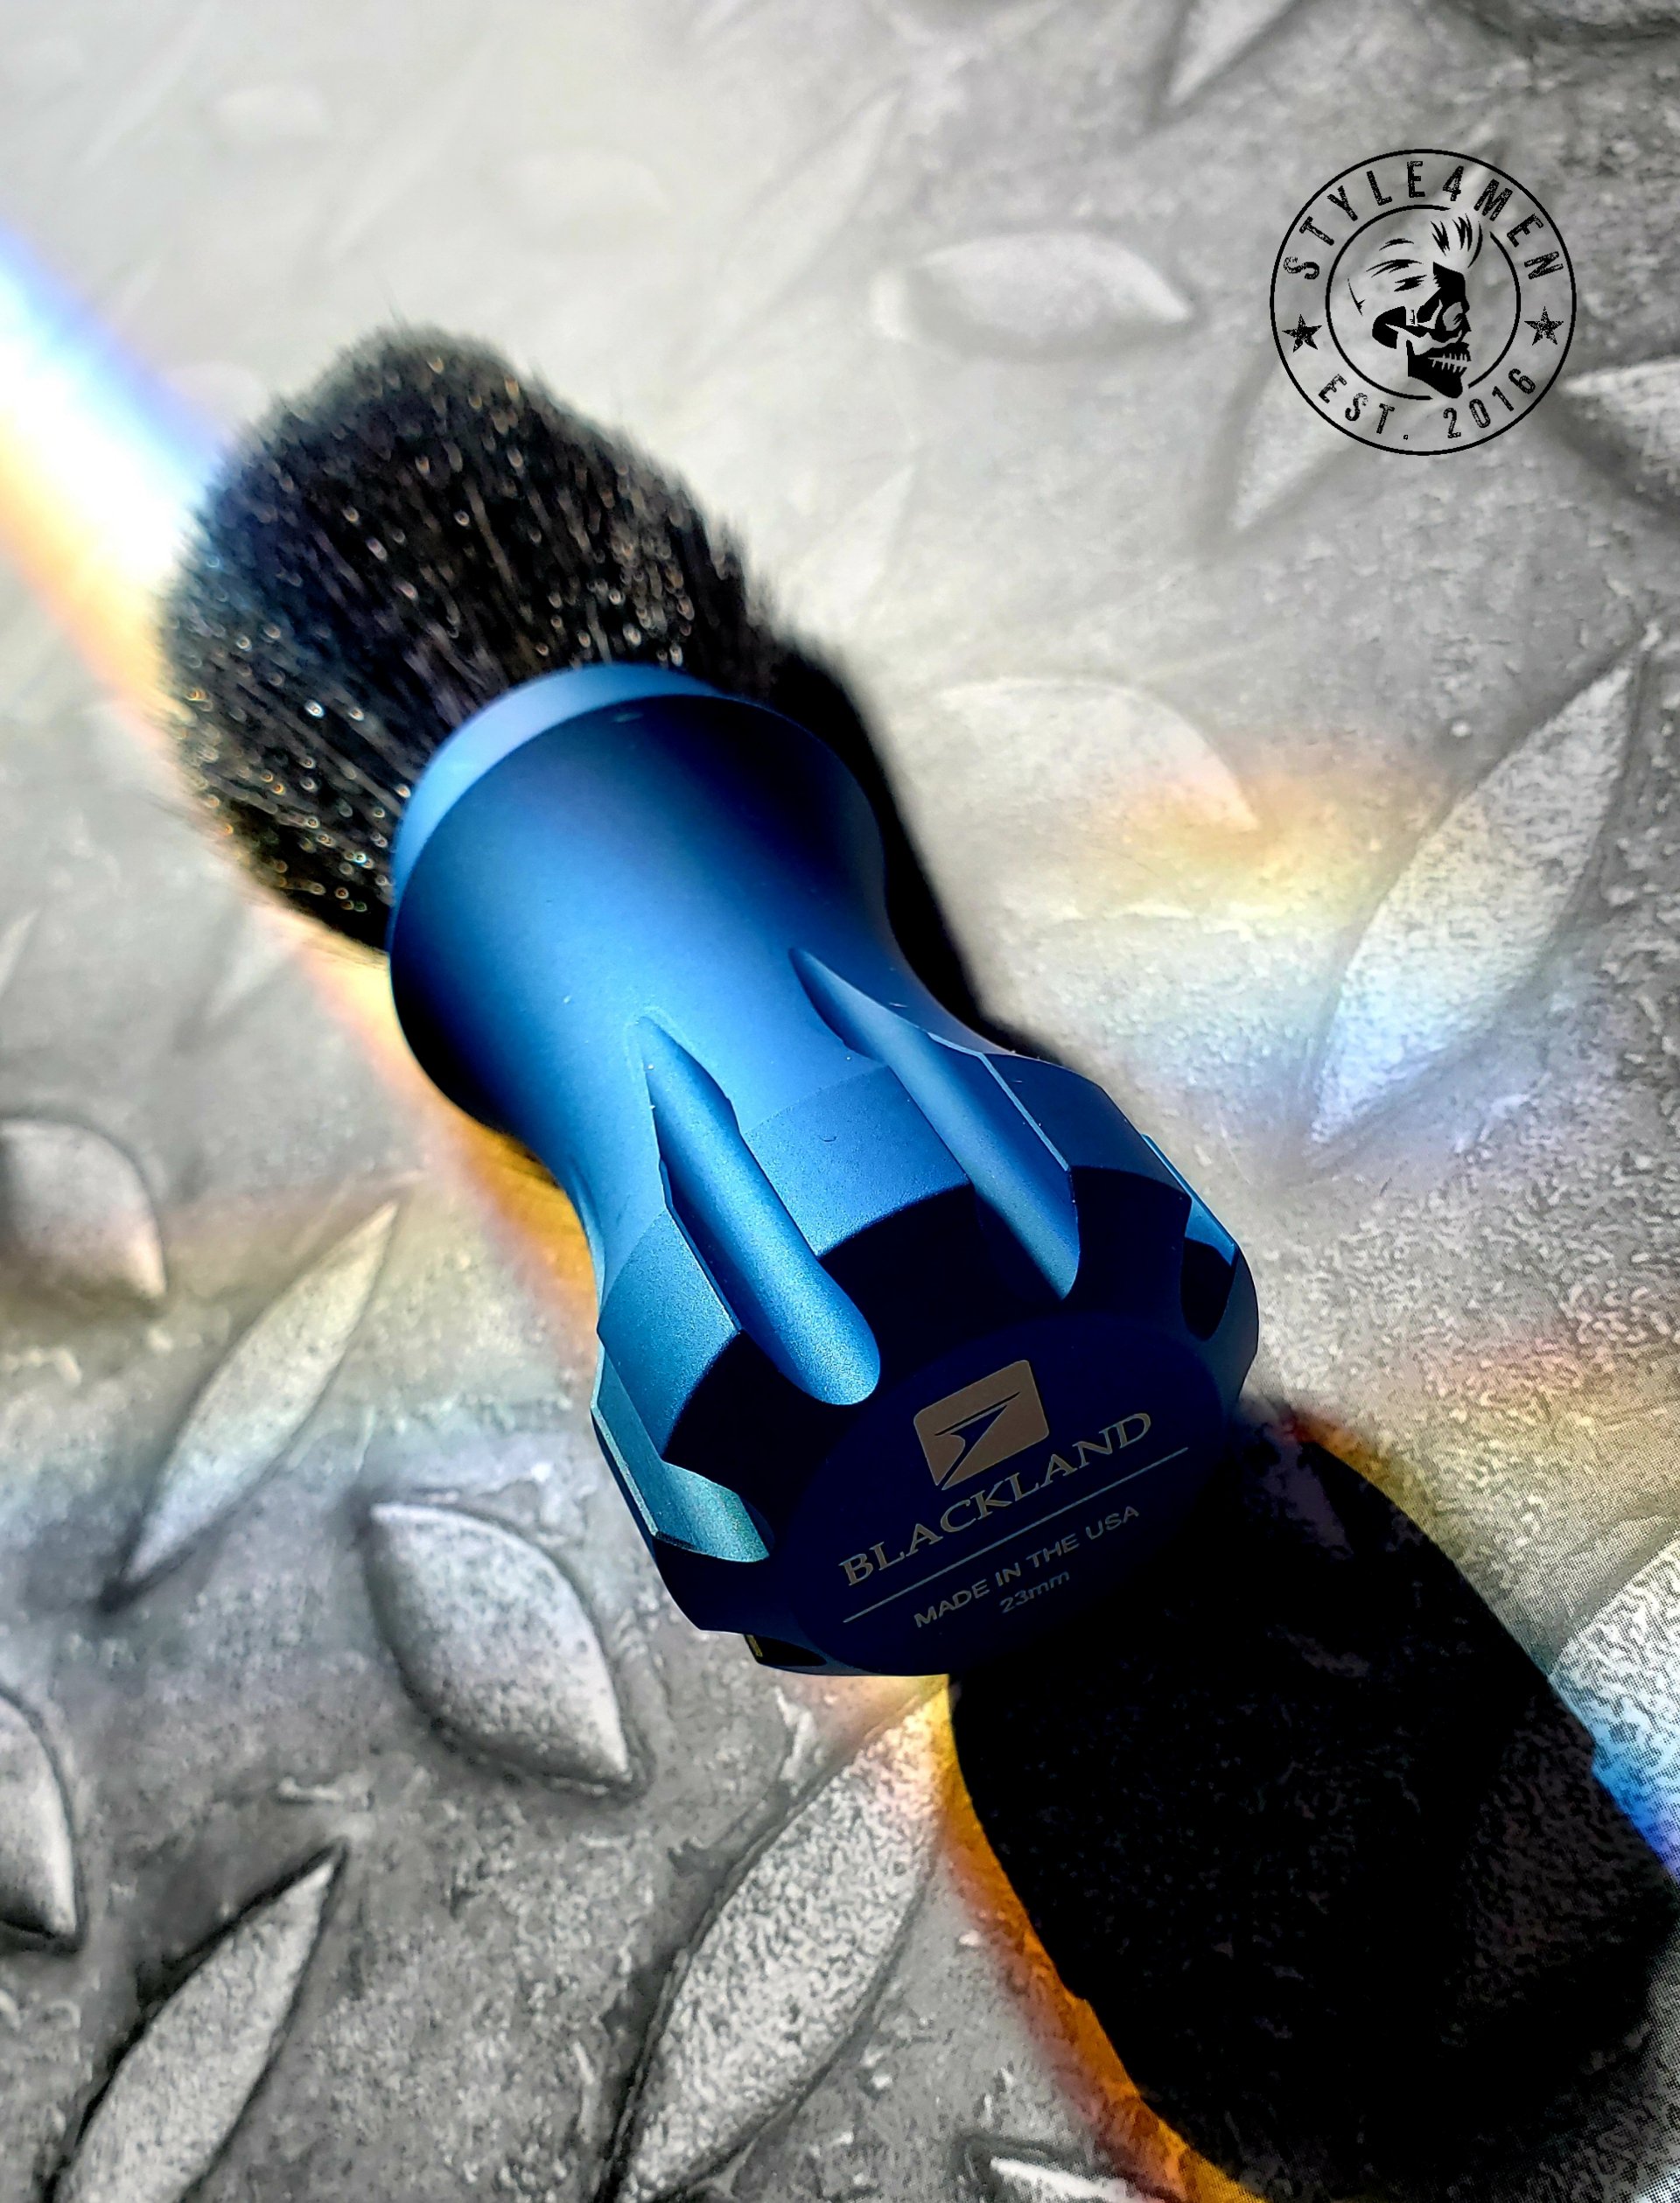 Blackland Shaving Brush – Classic instrument with modern styling